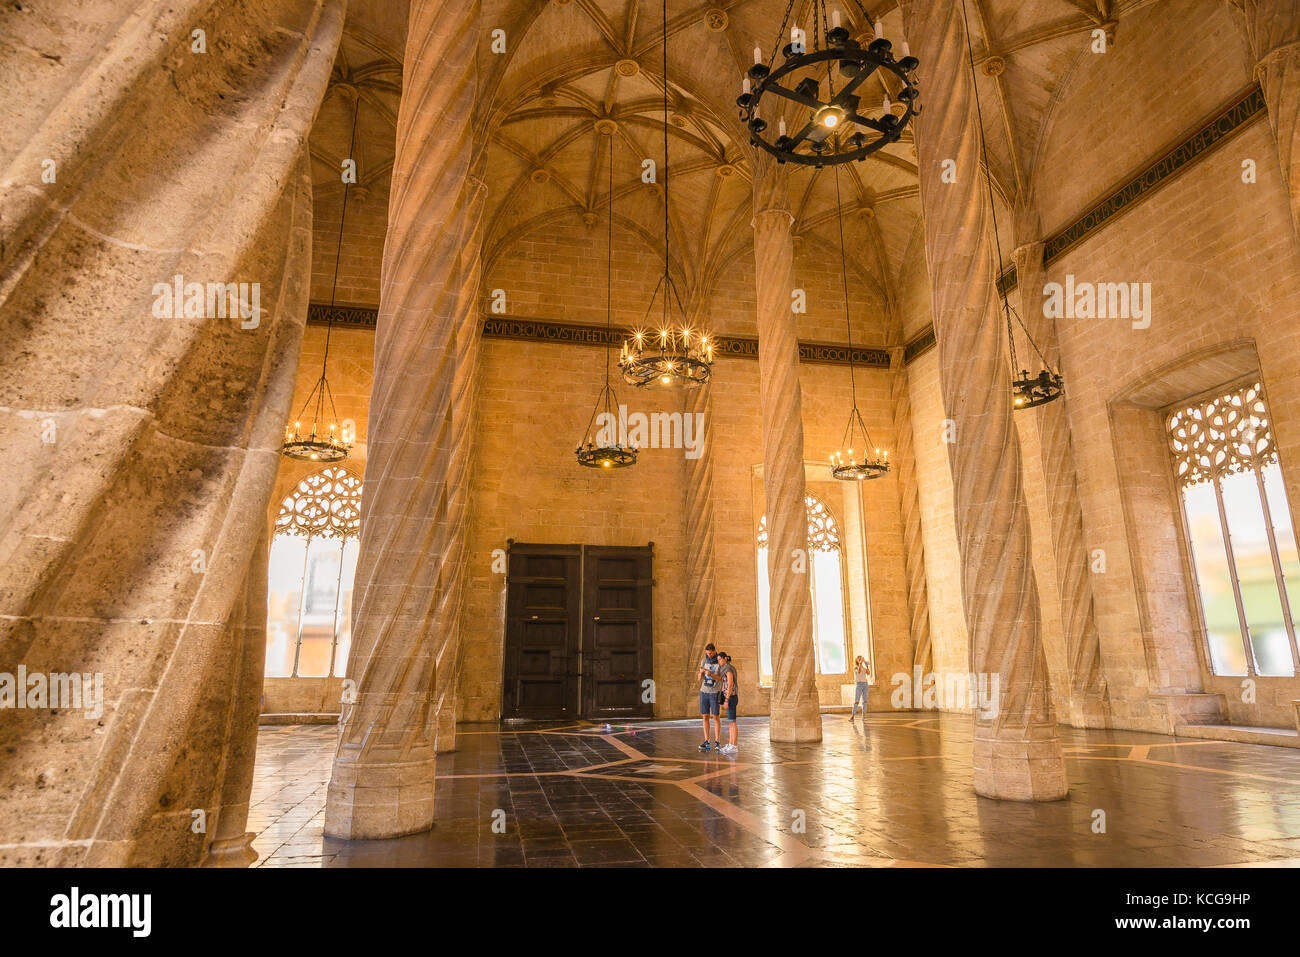 La Lonja Valencia, view of the gothic main hall, or Contracts Hall, of the La Lonja building in Valencia, with spiral columns and rib-vaulted ceiling. Stock Photo